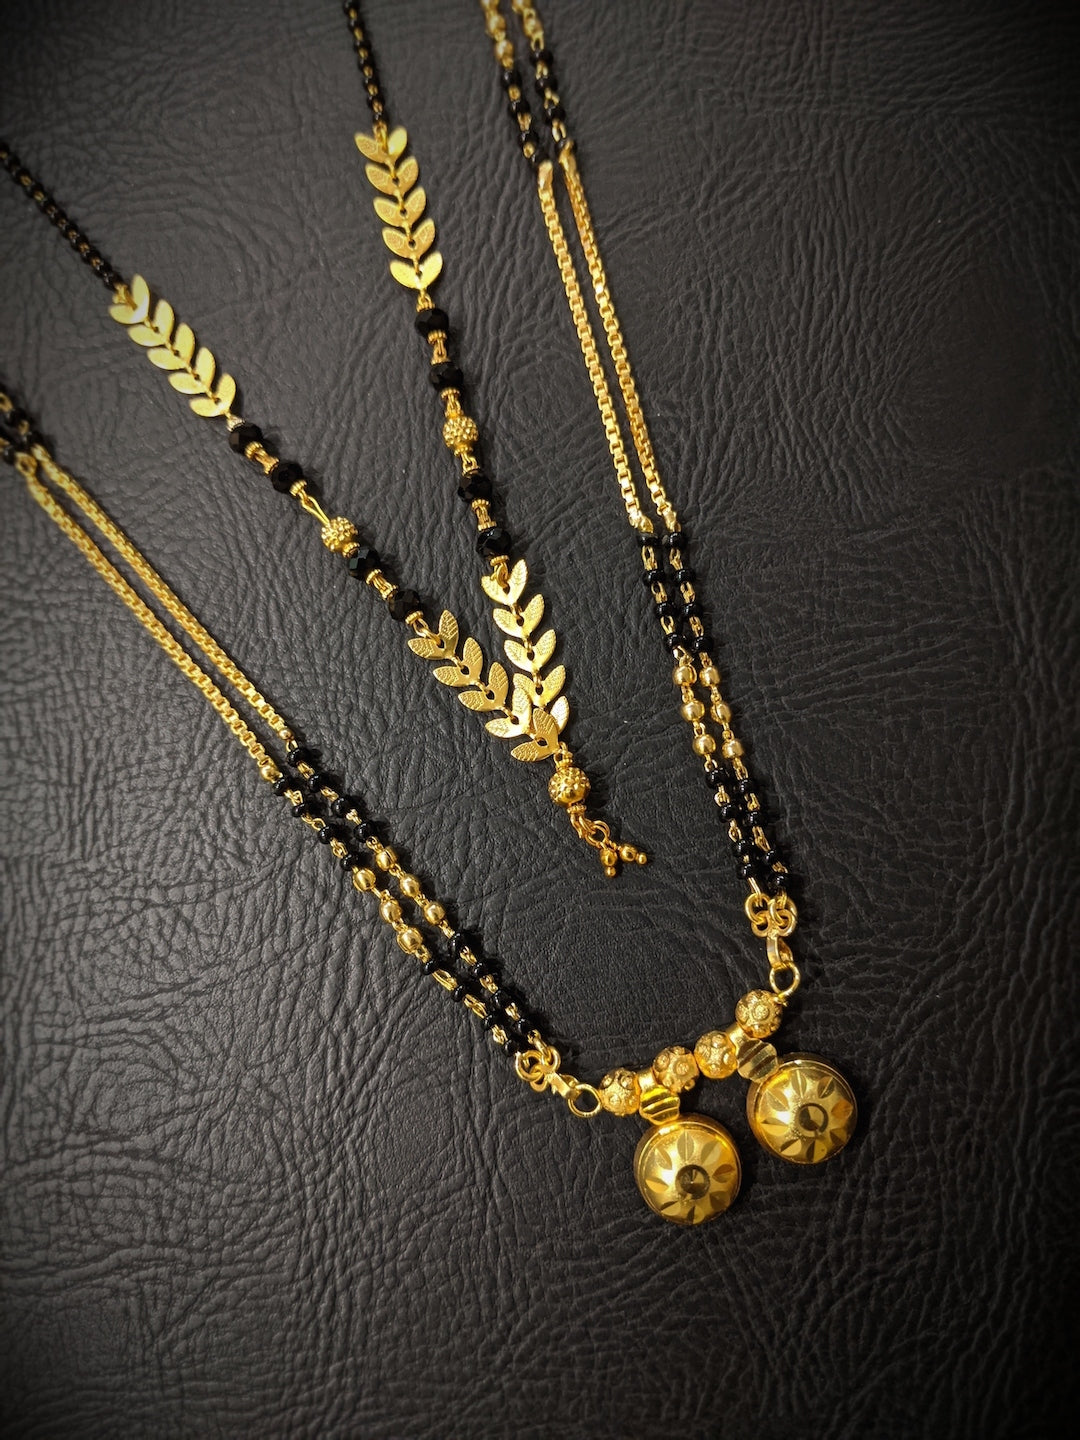 Latest Gold Plated Mangalsutra Designs | Best Price ...